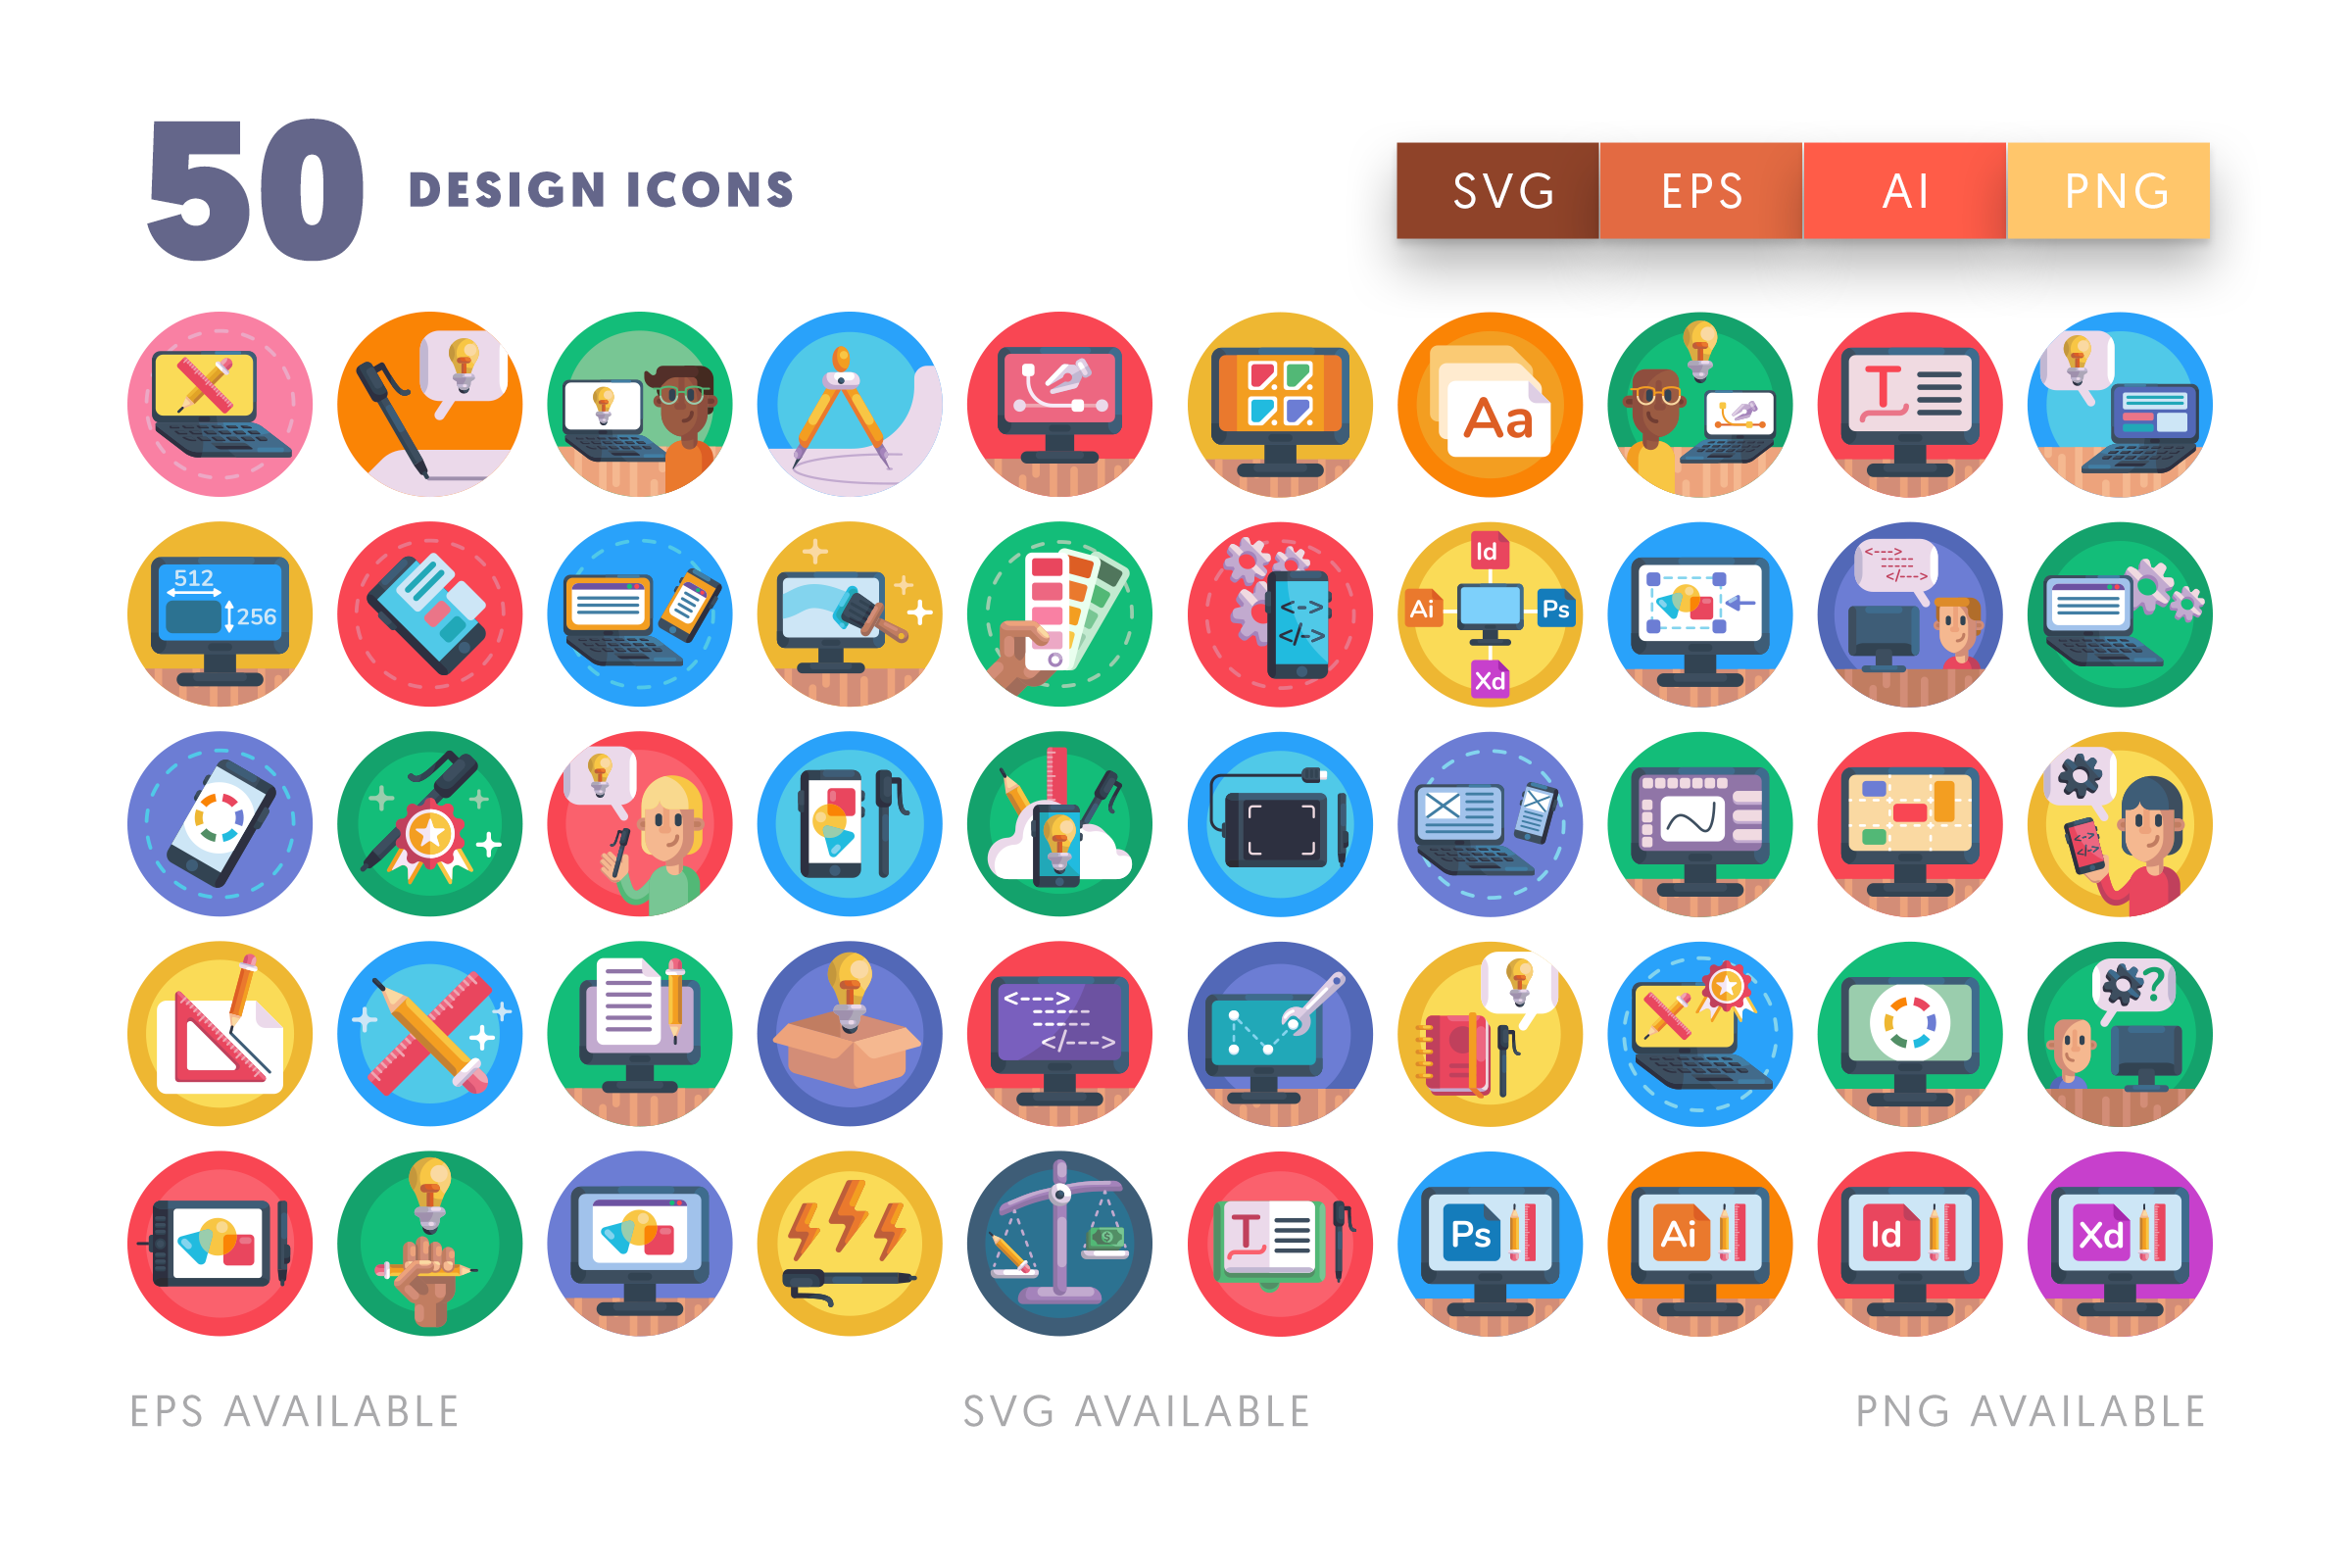 Design icons png/svg/eps